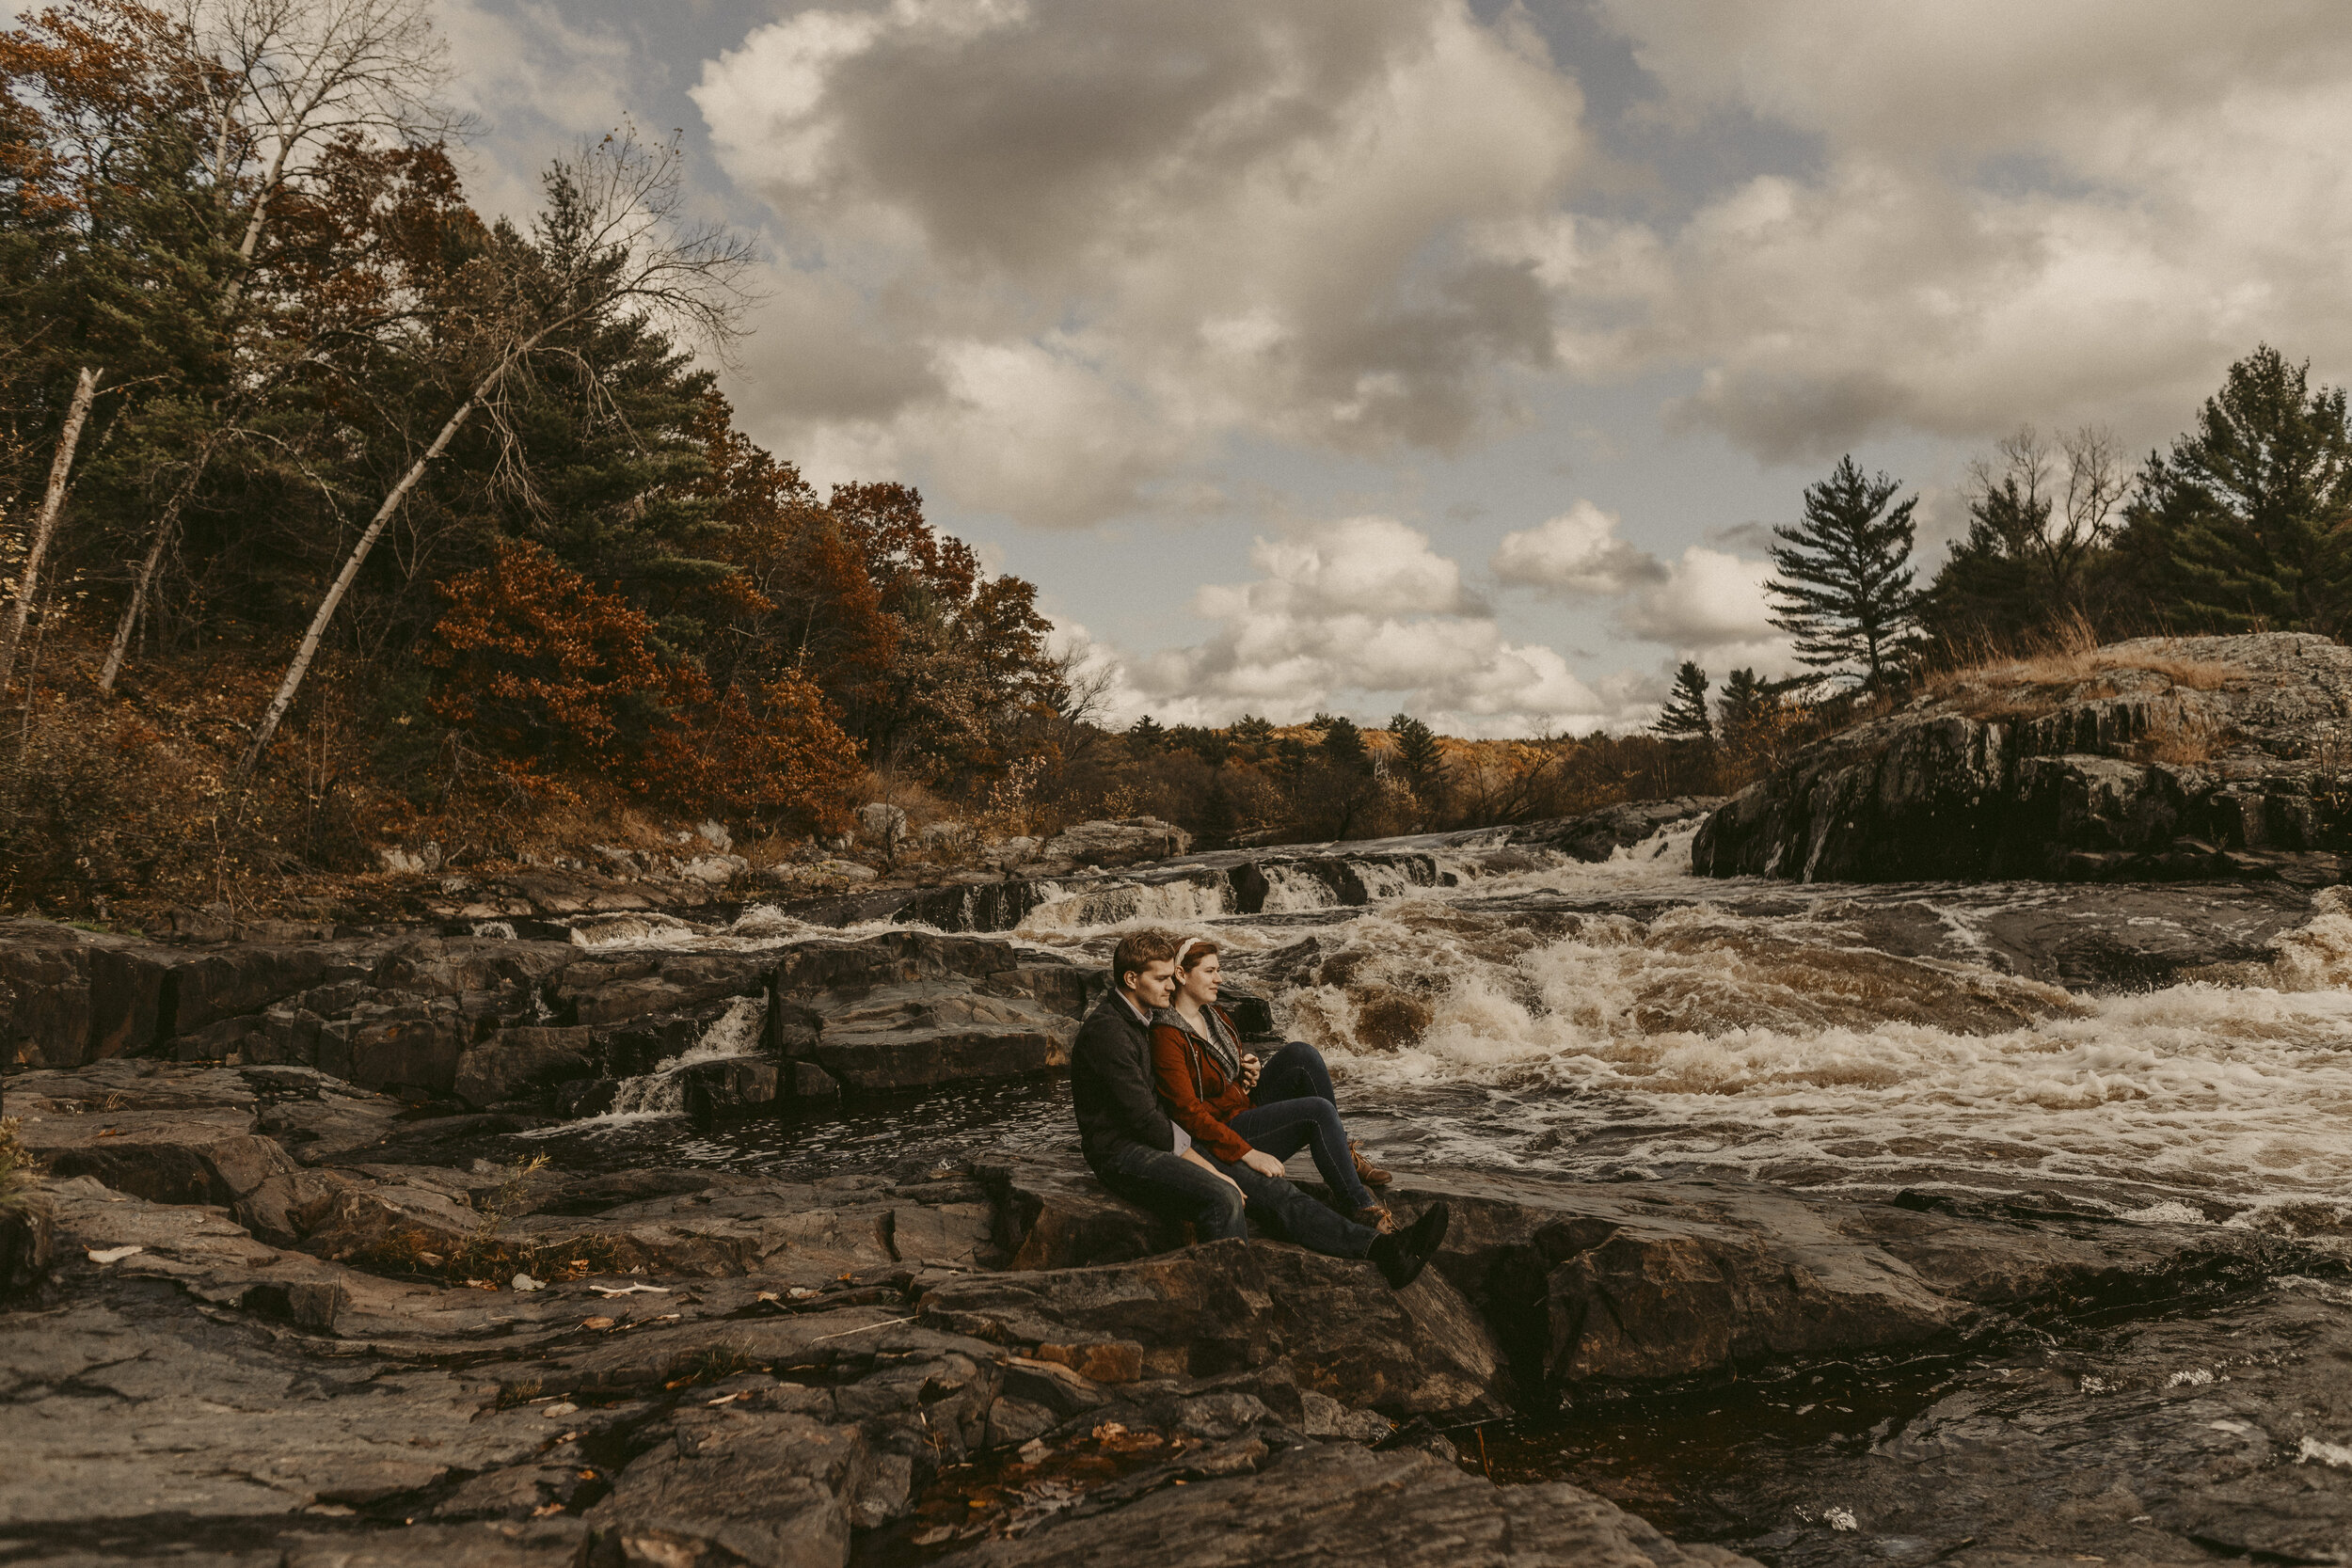  Elopement location for Big Falls County Park in Eau Claire with rushing water and rocks 